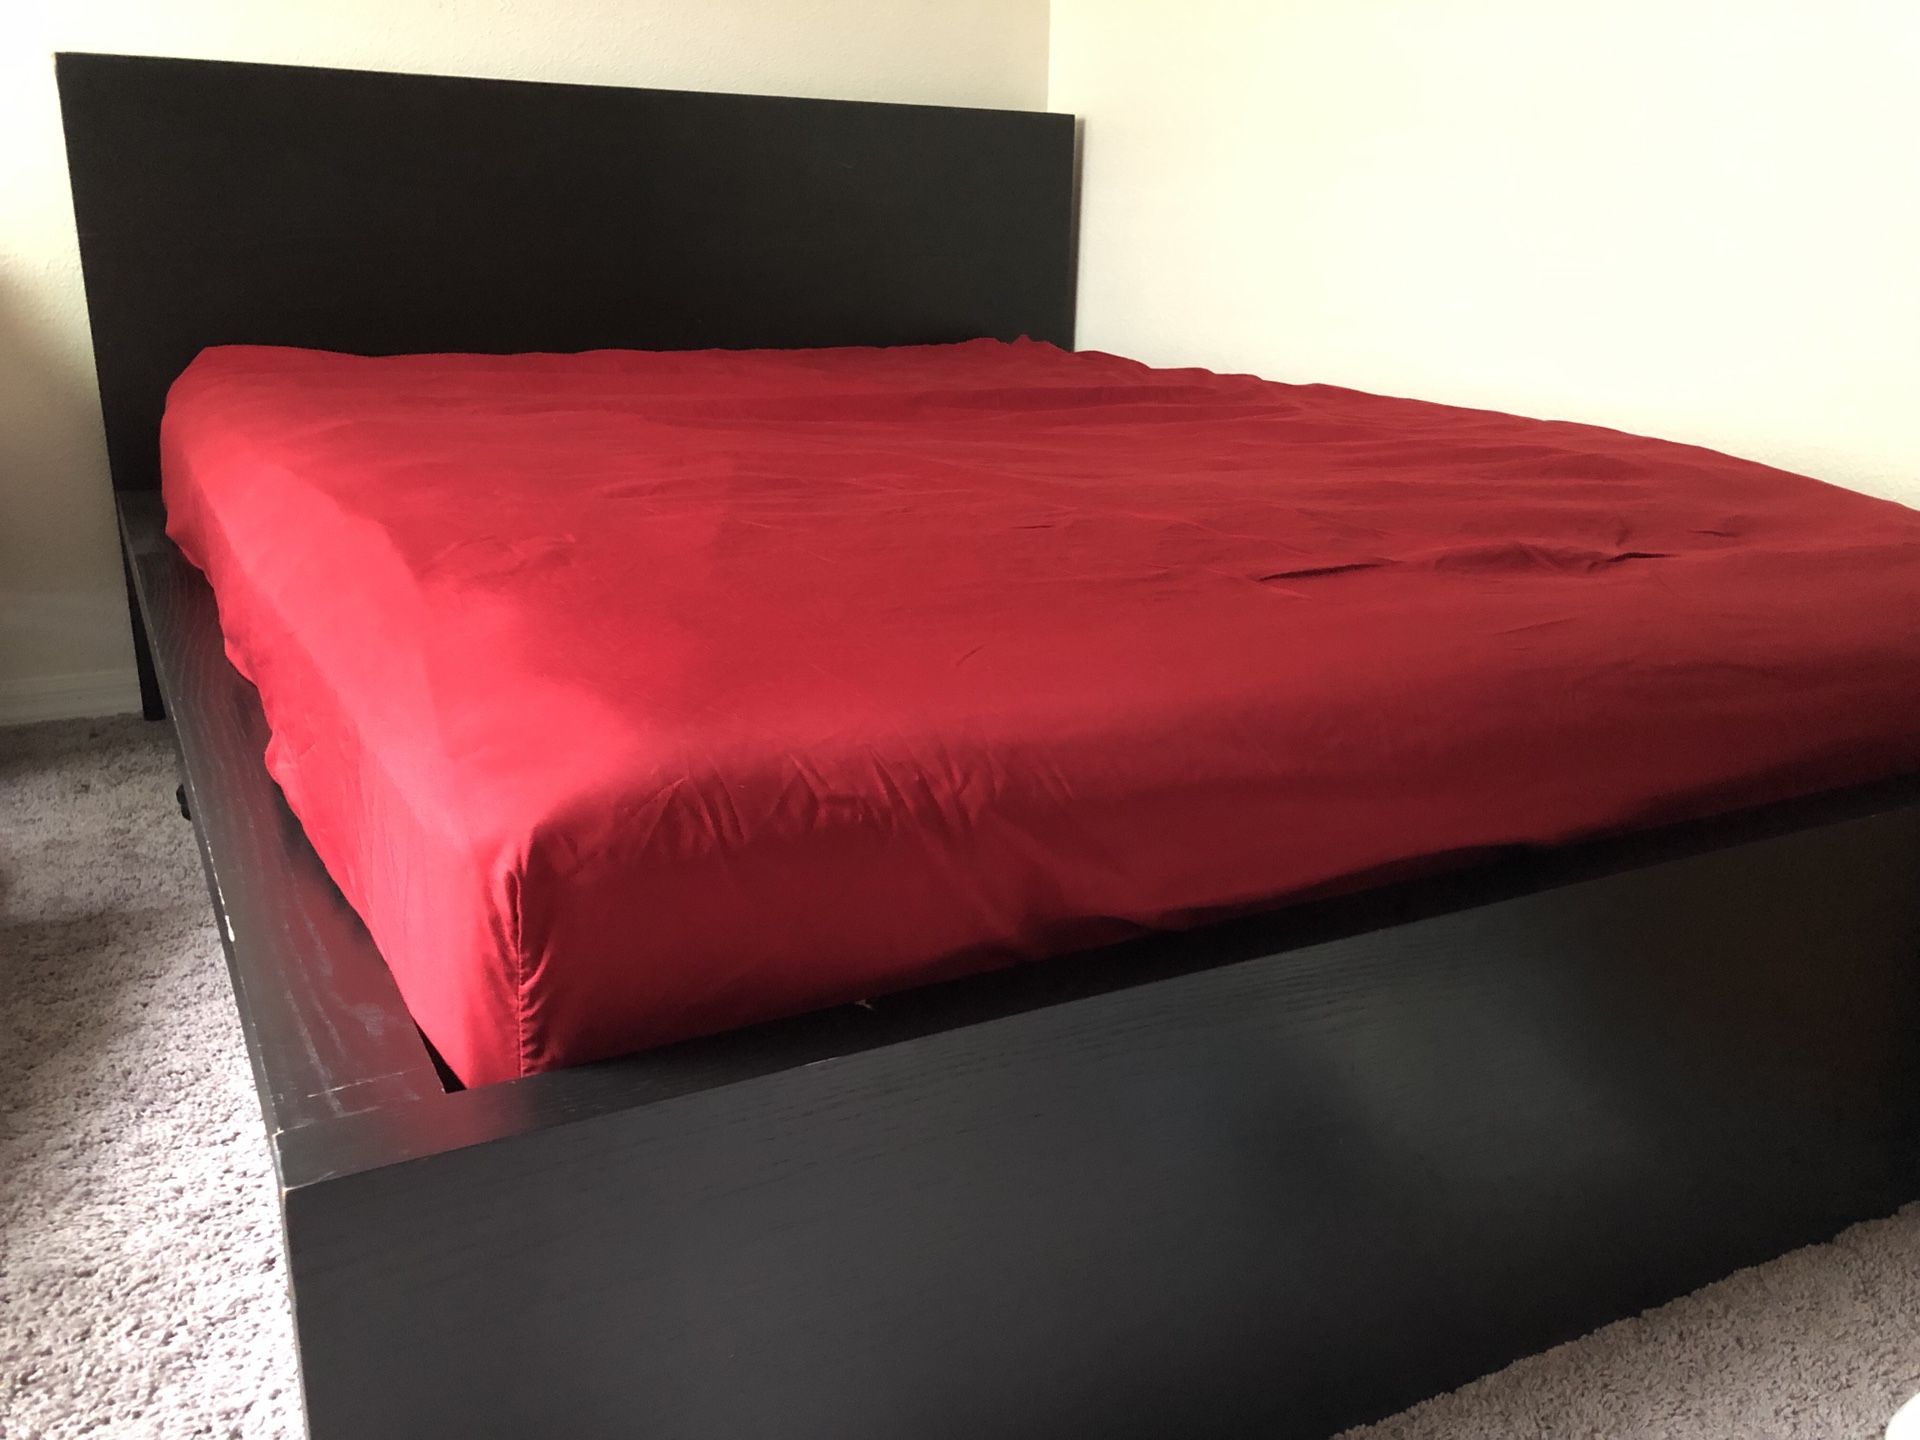 Queen size bed and mattress set